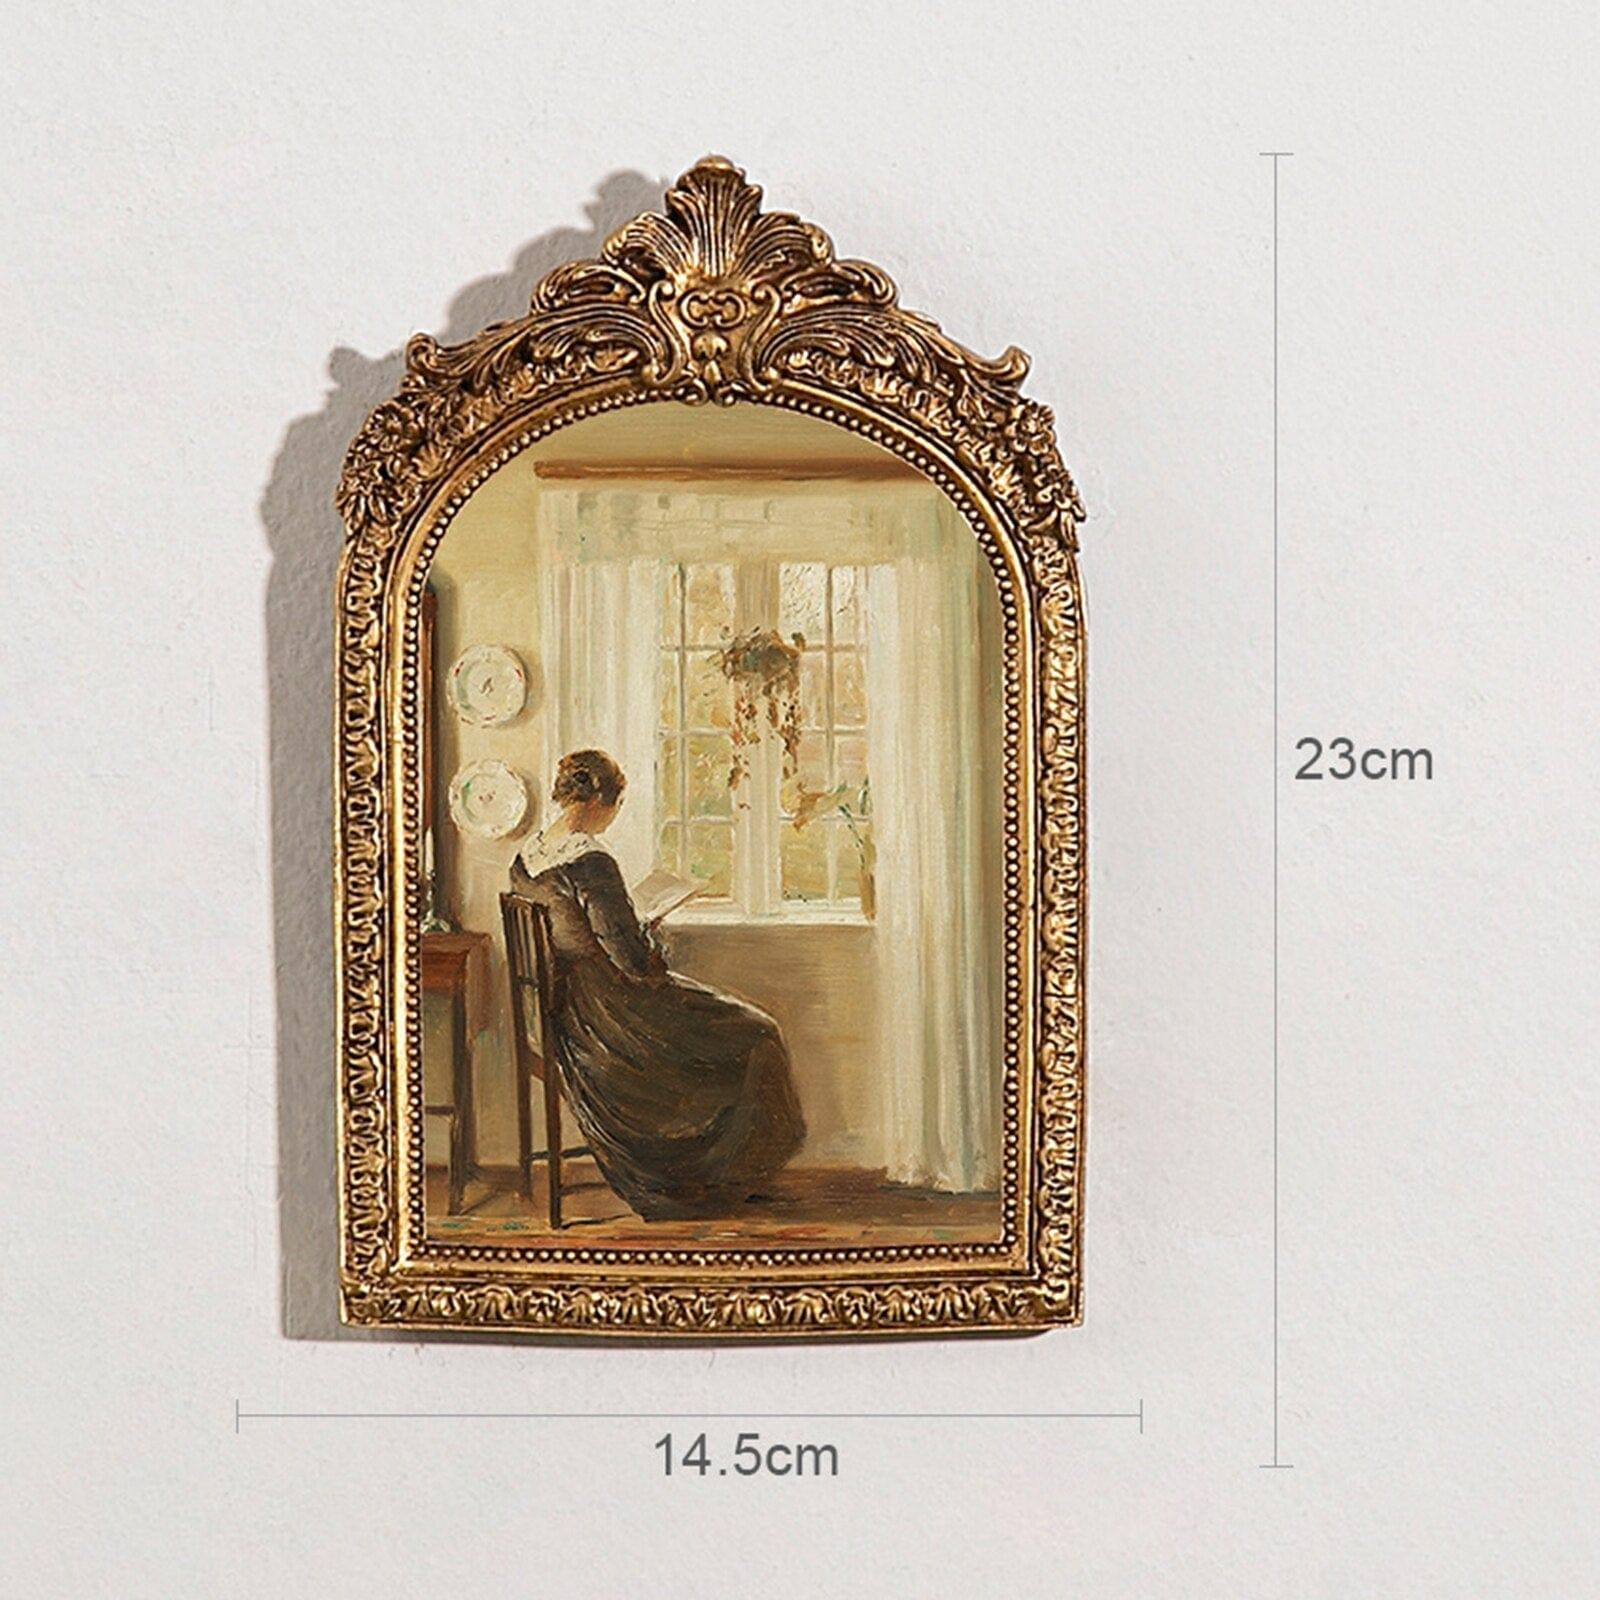 Shop 0 14.5cmx23cm European Style Photo Frame Embossed Floral Tabletop Hanging Picture Holder Mademoiselle Home Decor